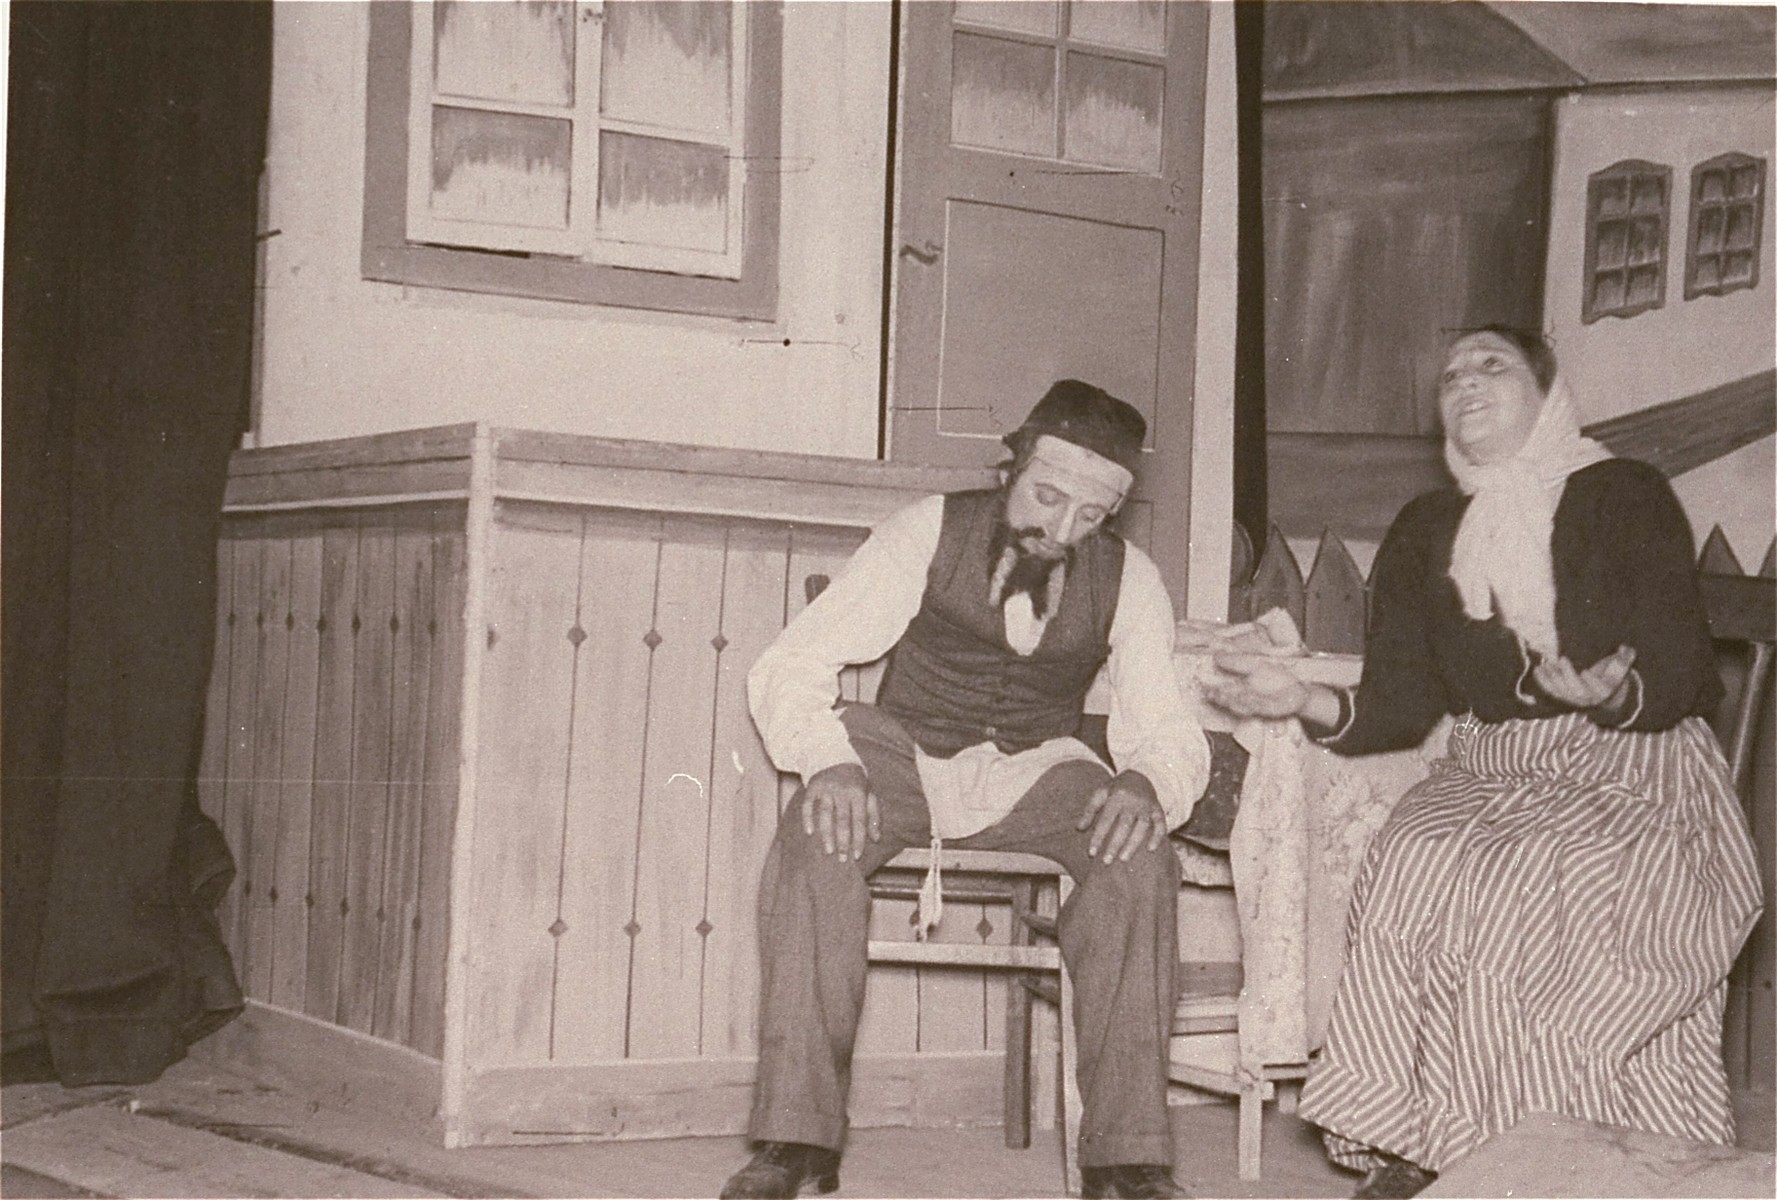 A theatrical troupe in performs in the Zeilsheim displaced persons' camp.